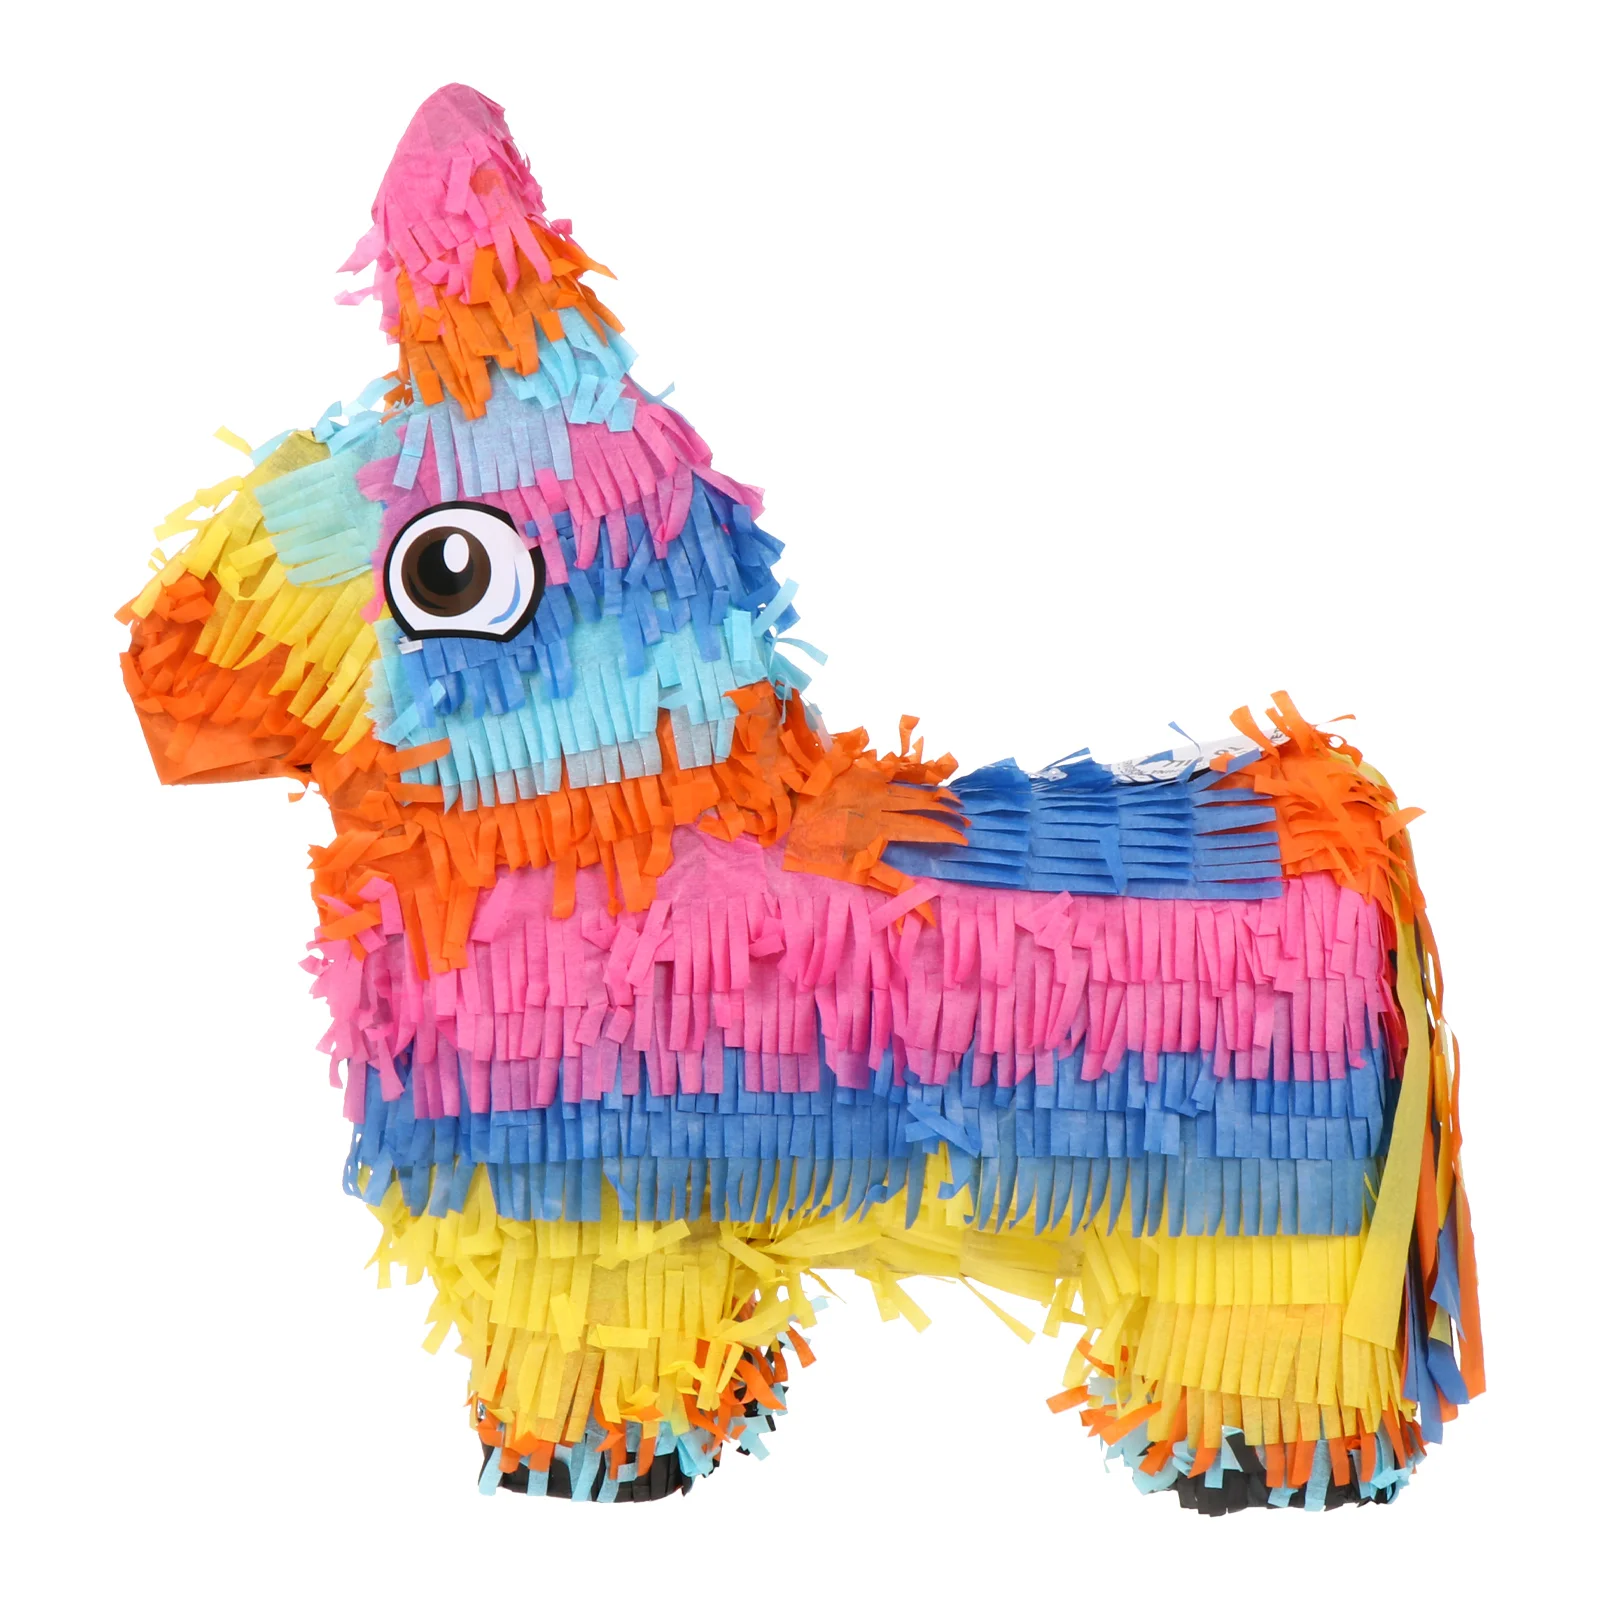 

Pony Pinata Birthday Toy Filling Paper Children's Funny Party Favor Sugar Filled Plaything Hit